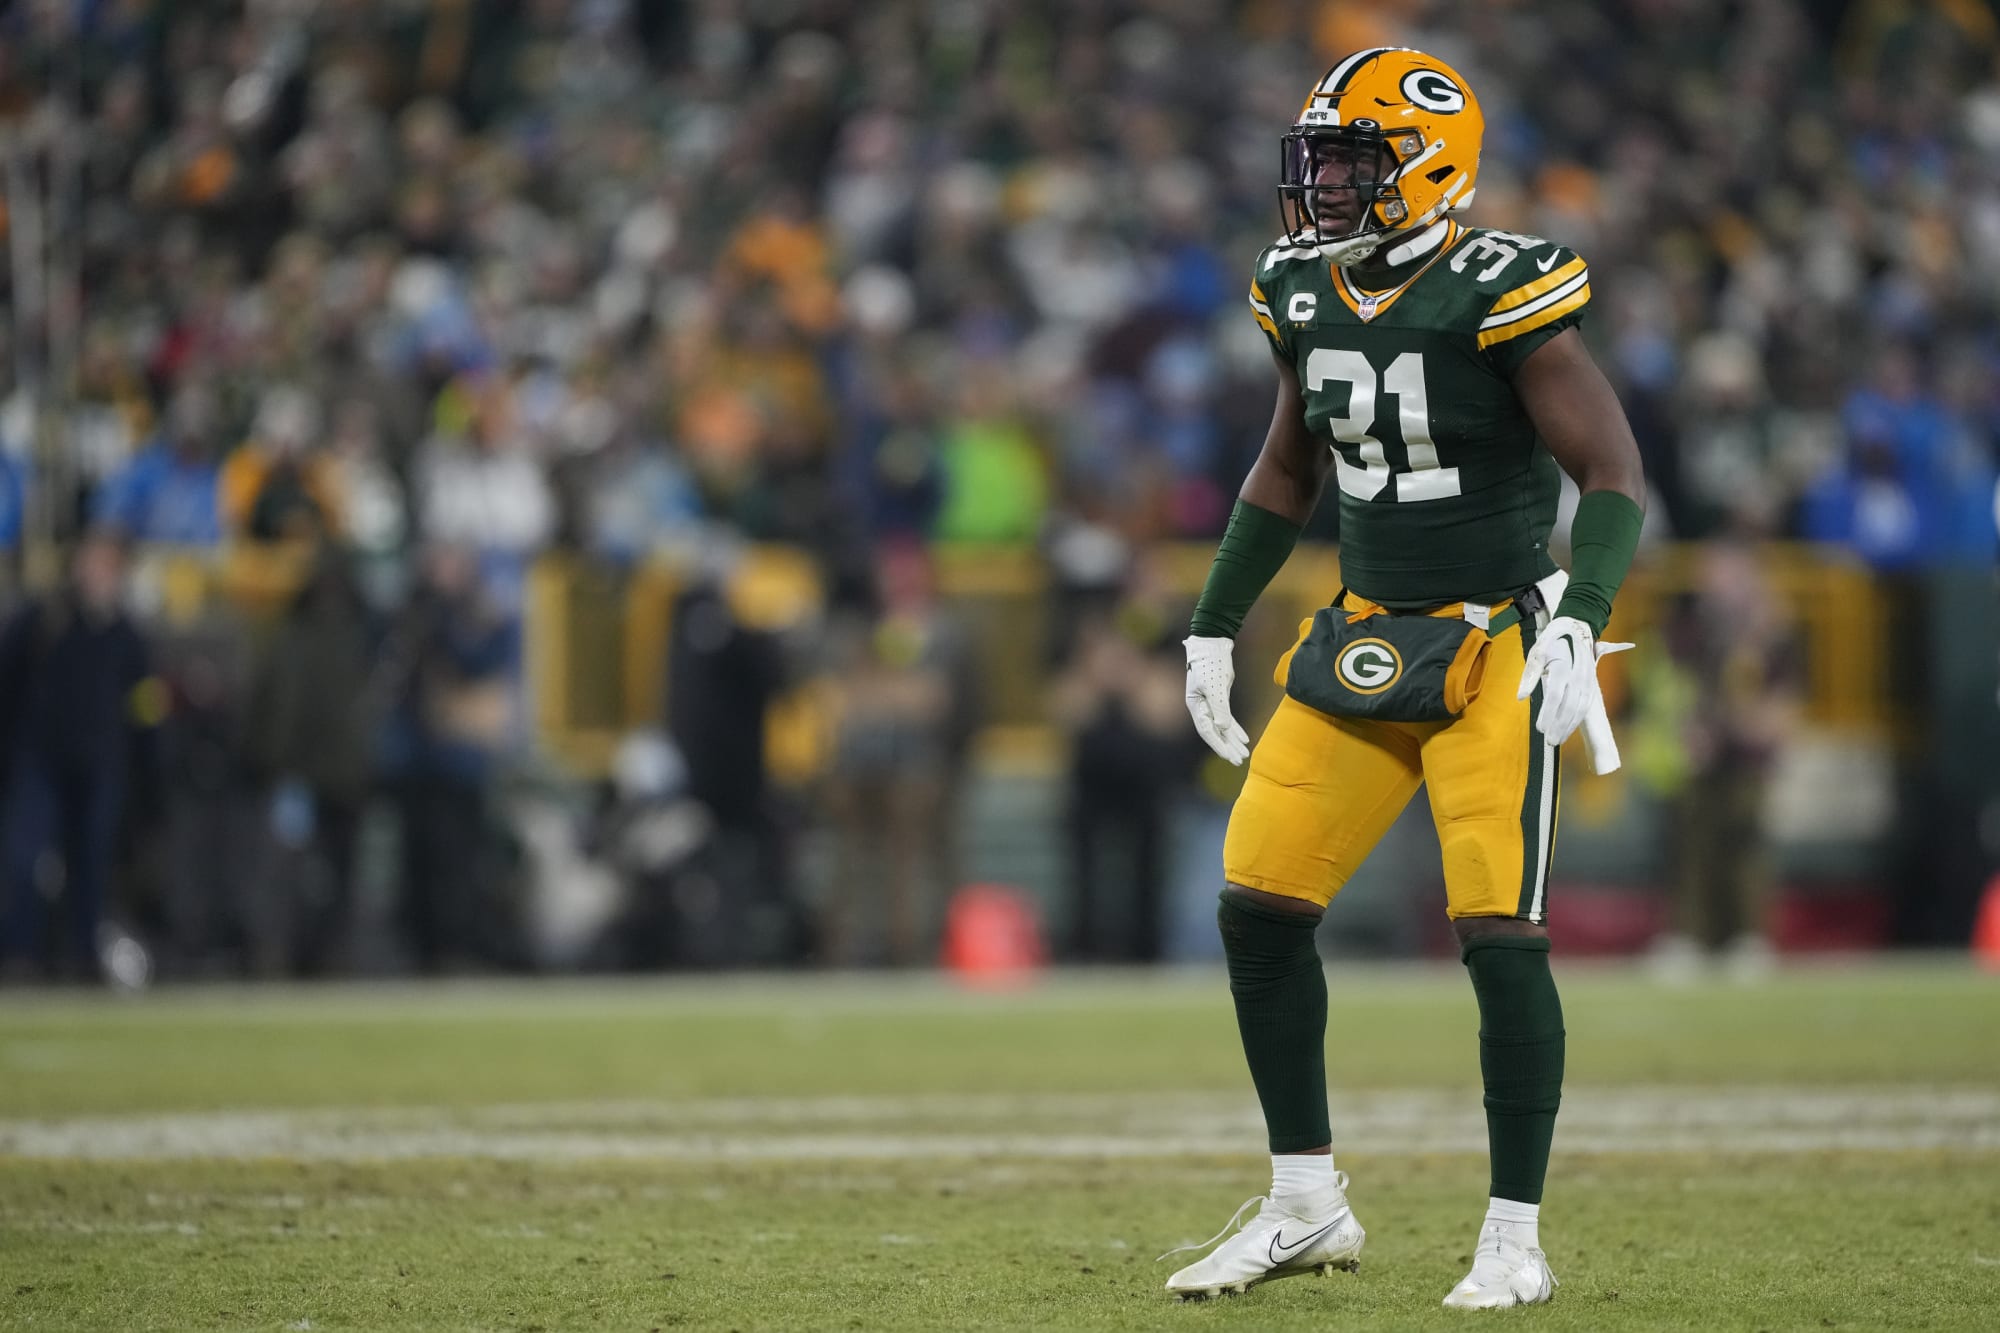 Jets sign another former Packers player to reunite with Aaron Rodgers